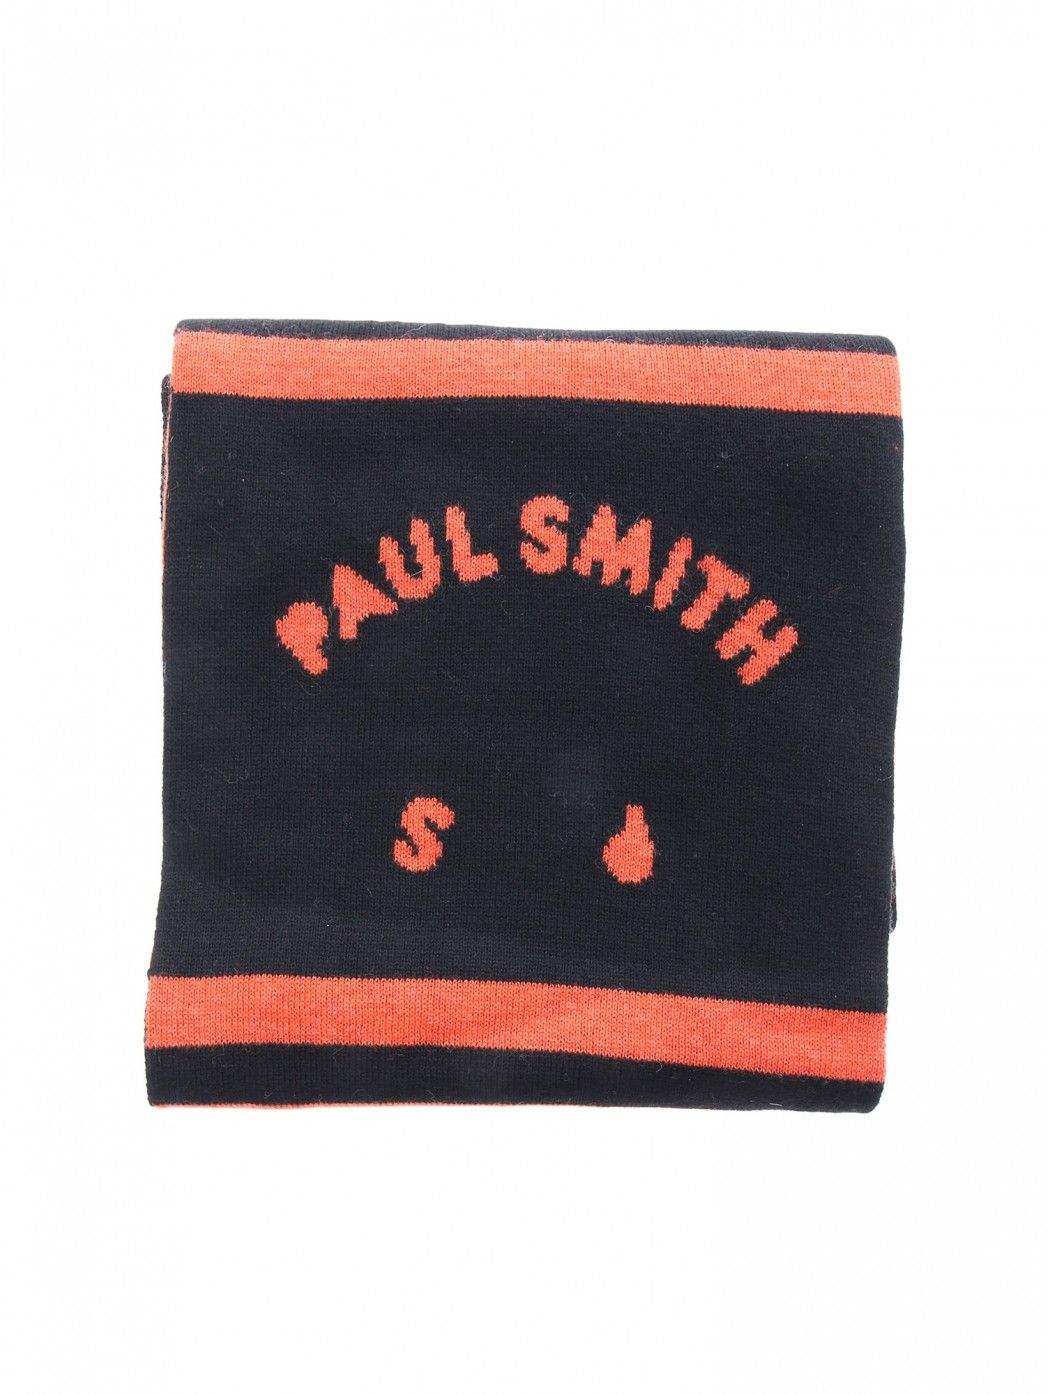 MENS SCARF PS FACE  PAUL SMITH